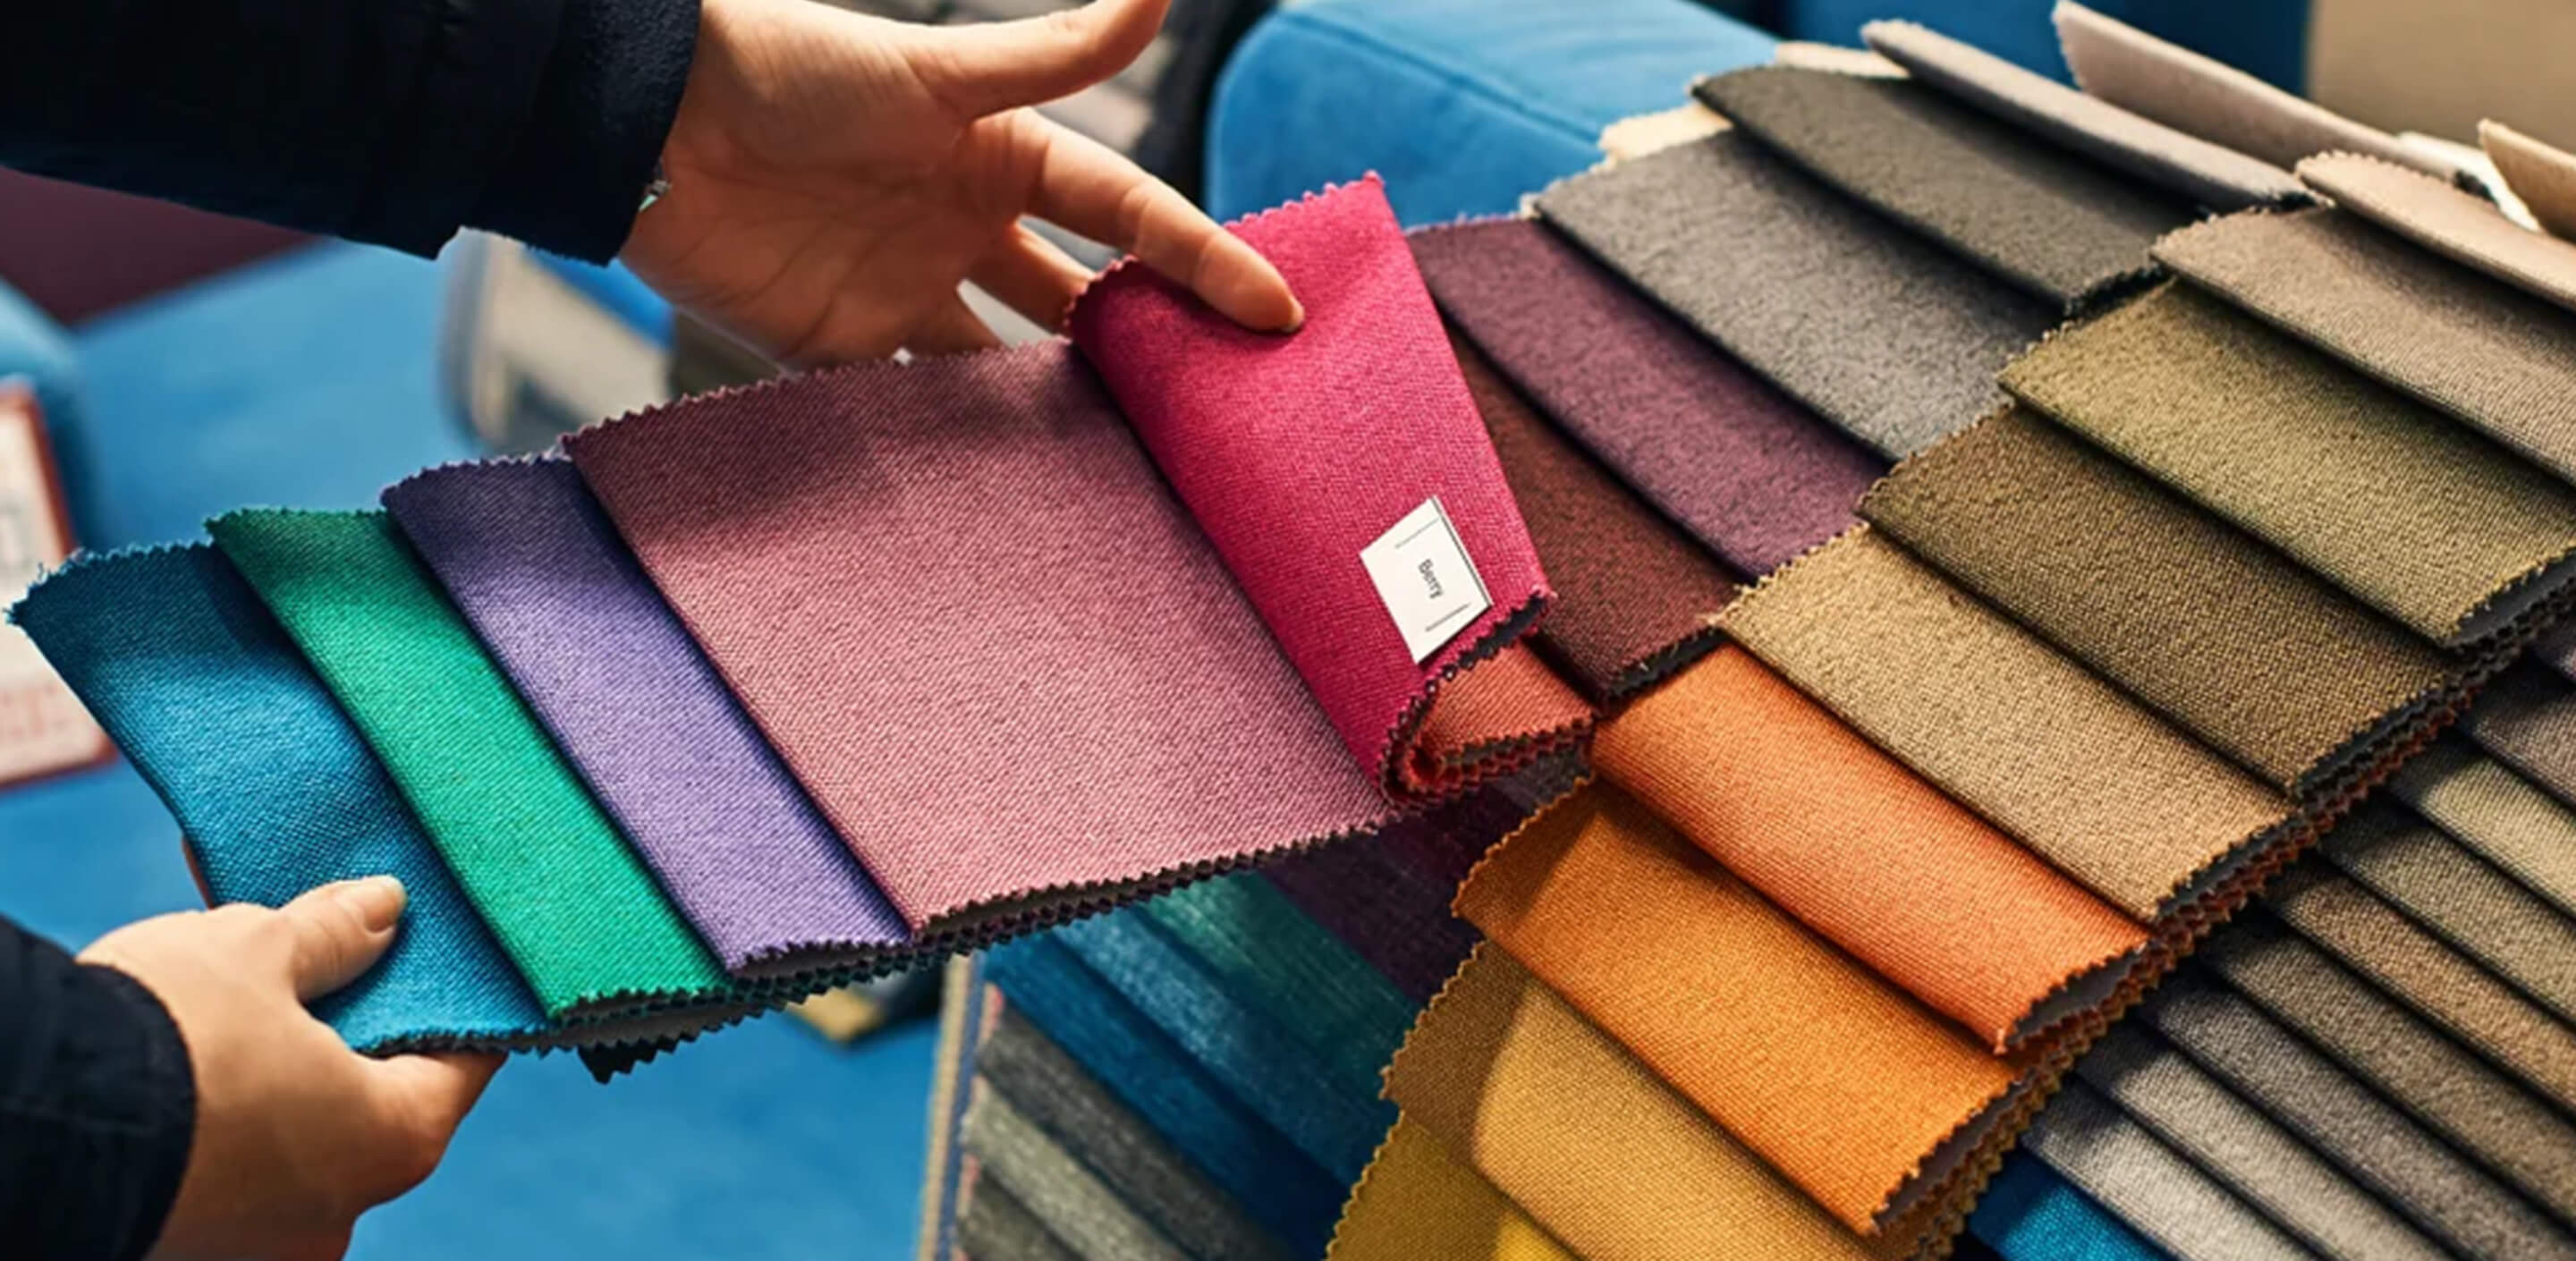 How to Choose the Most Suitable Fabric for Your Project